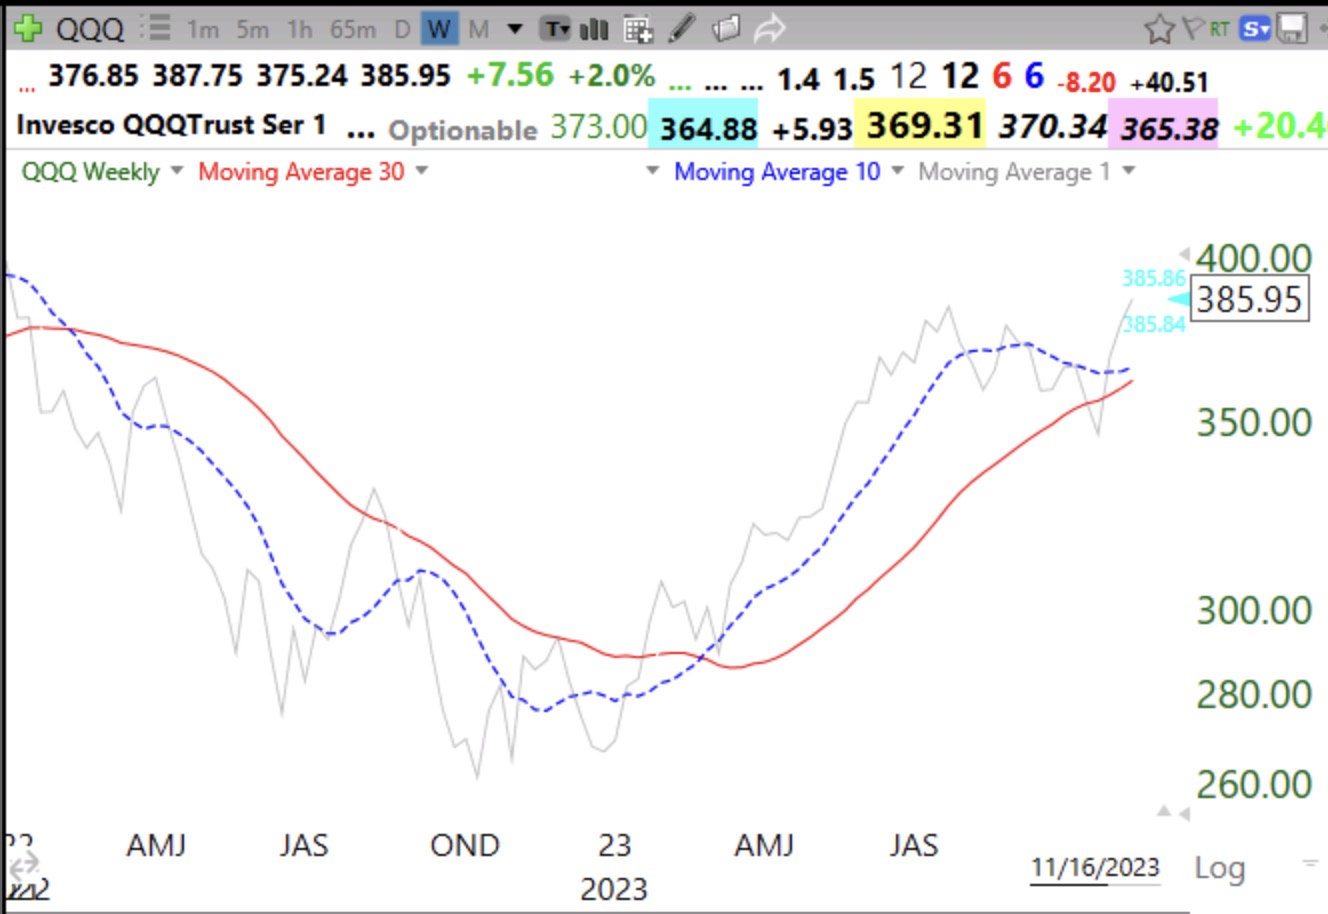 Blog Post: Day 3 of new $QQQ short term down-trend and the GMI turns RED;  the 10:30 weekly chart shows the long term trend for $QQQ remains intact